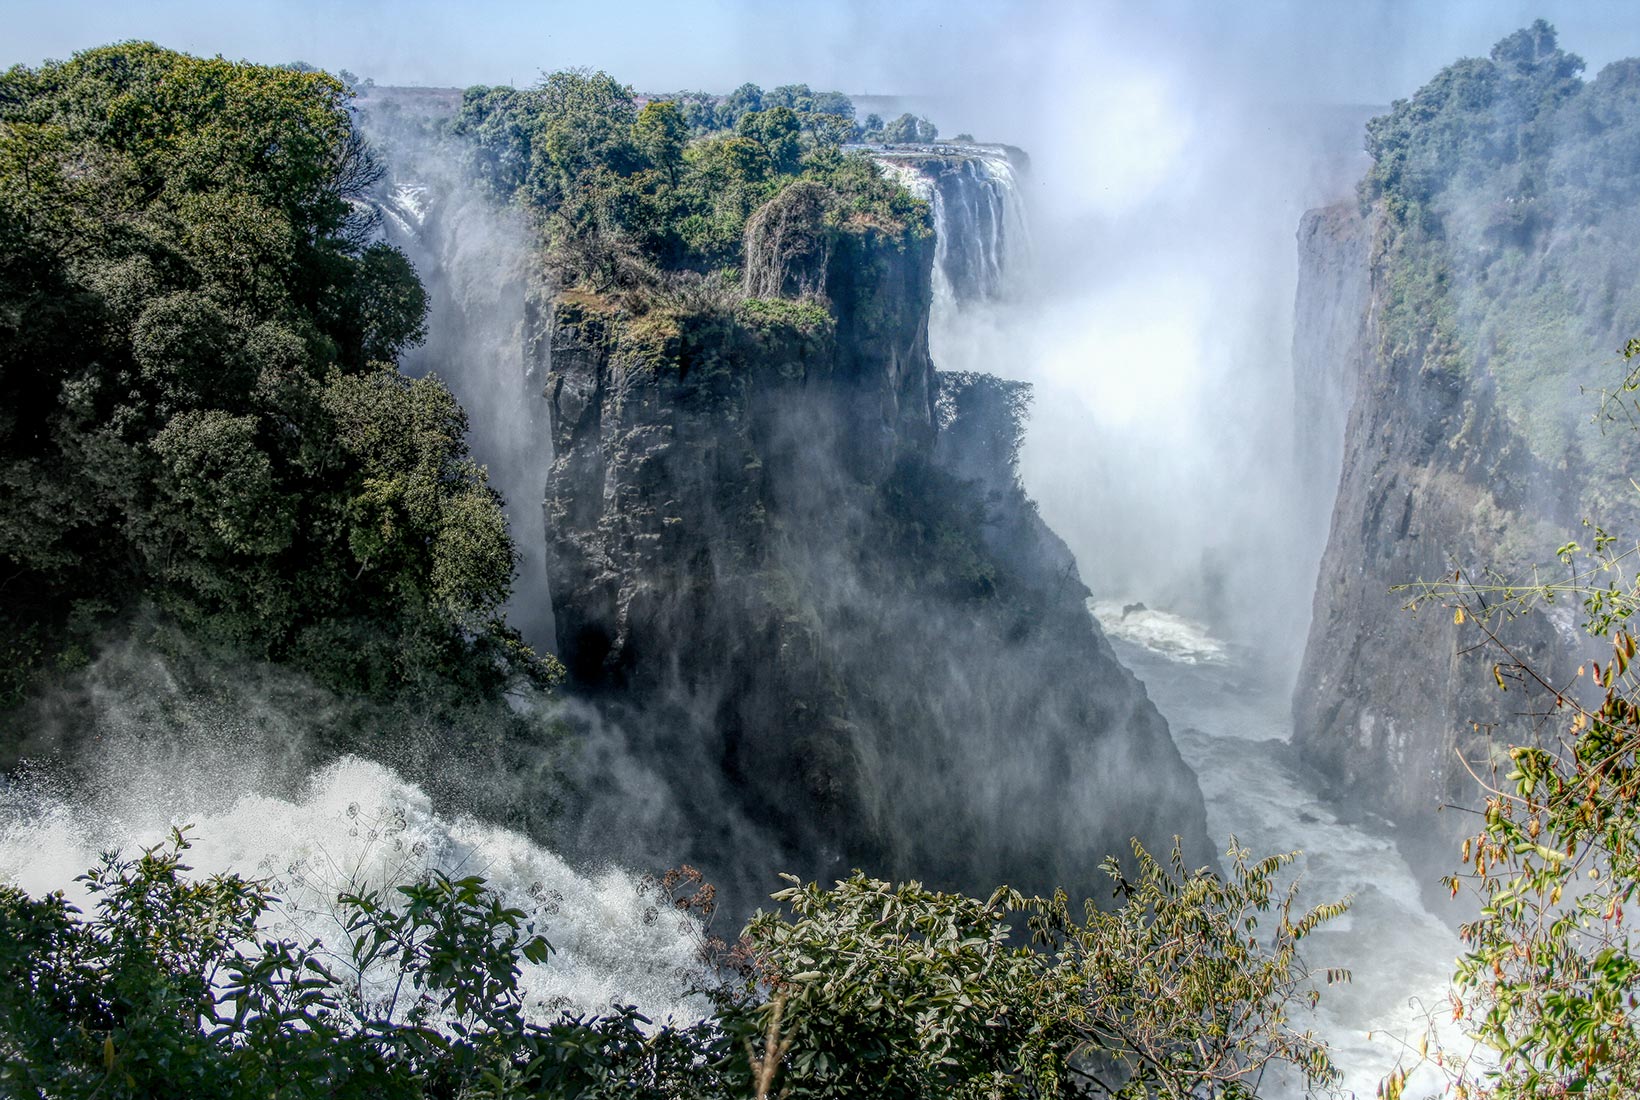 Another view of Victoria Falls in Zimbabwe